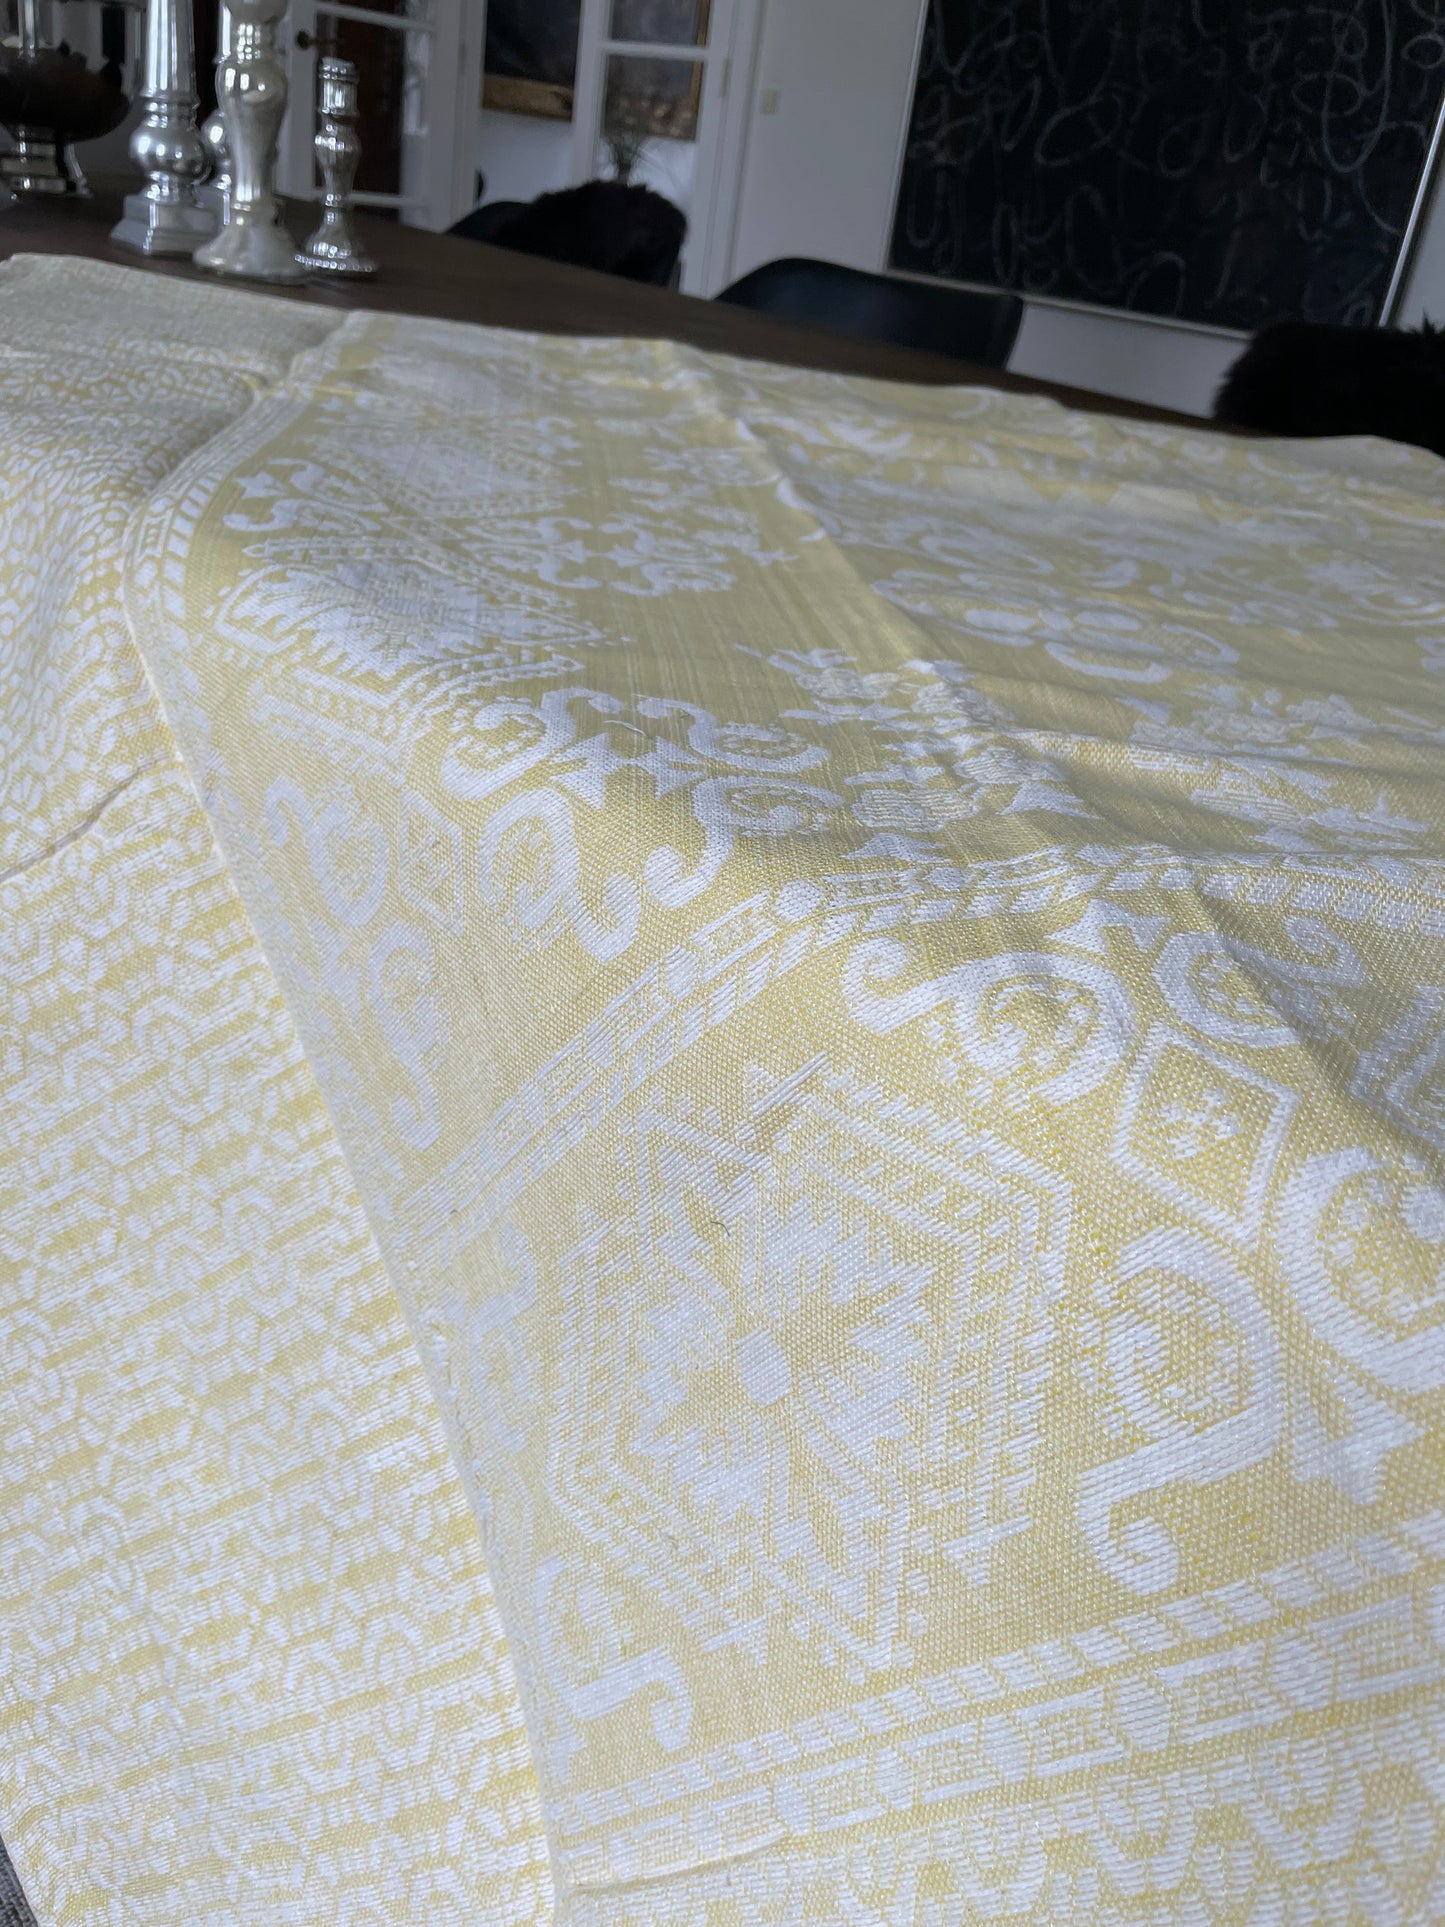 Bedspreads with damask weave in locally harvested cotton. Fair Trade from Afghanistan